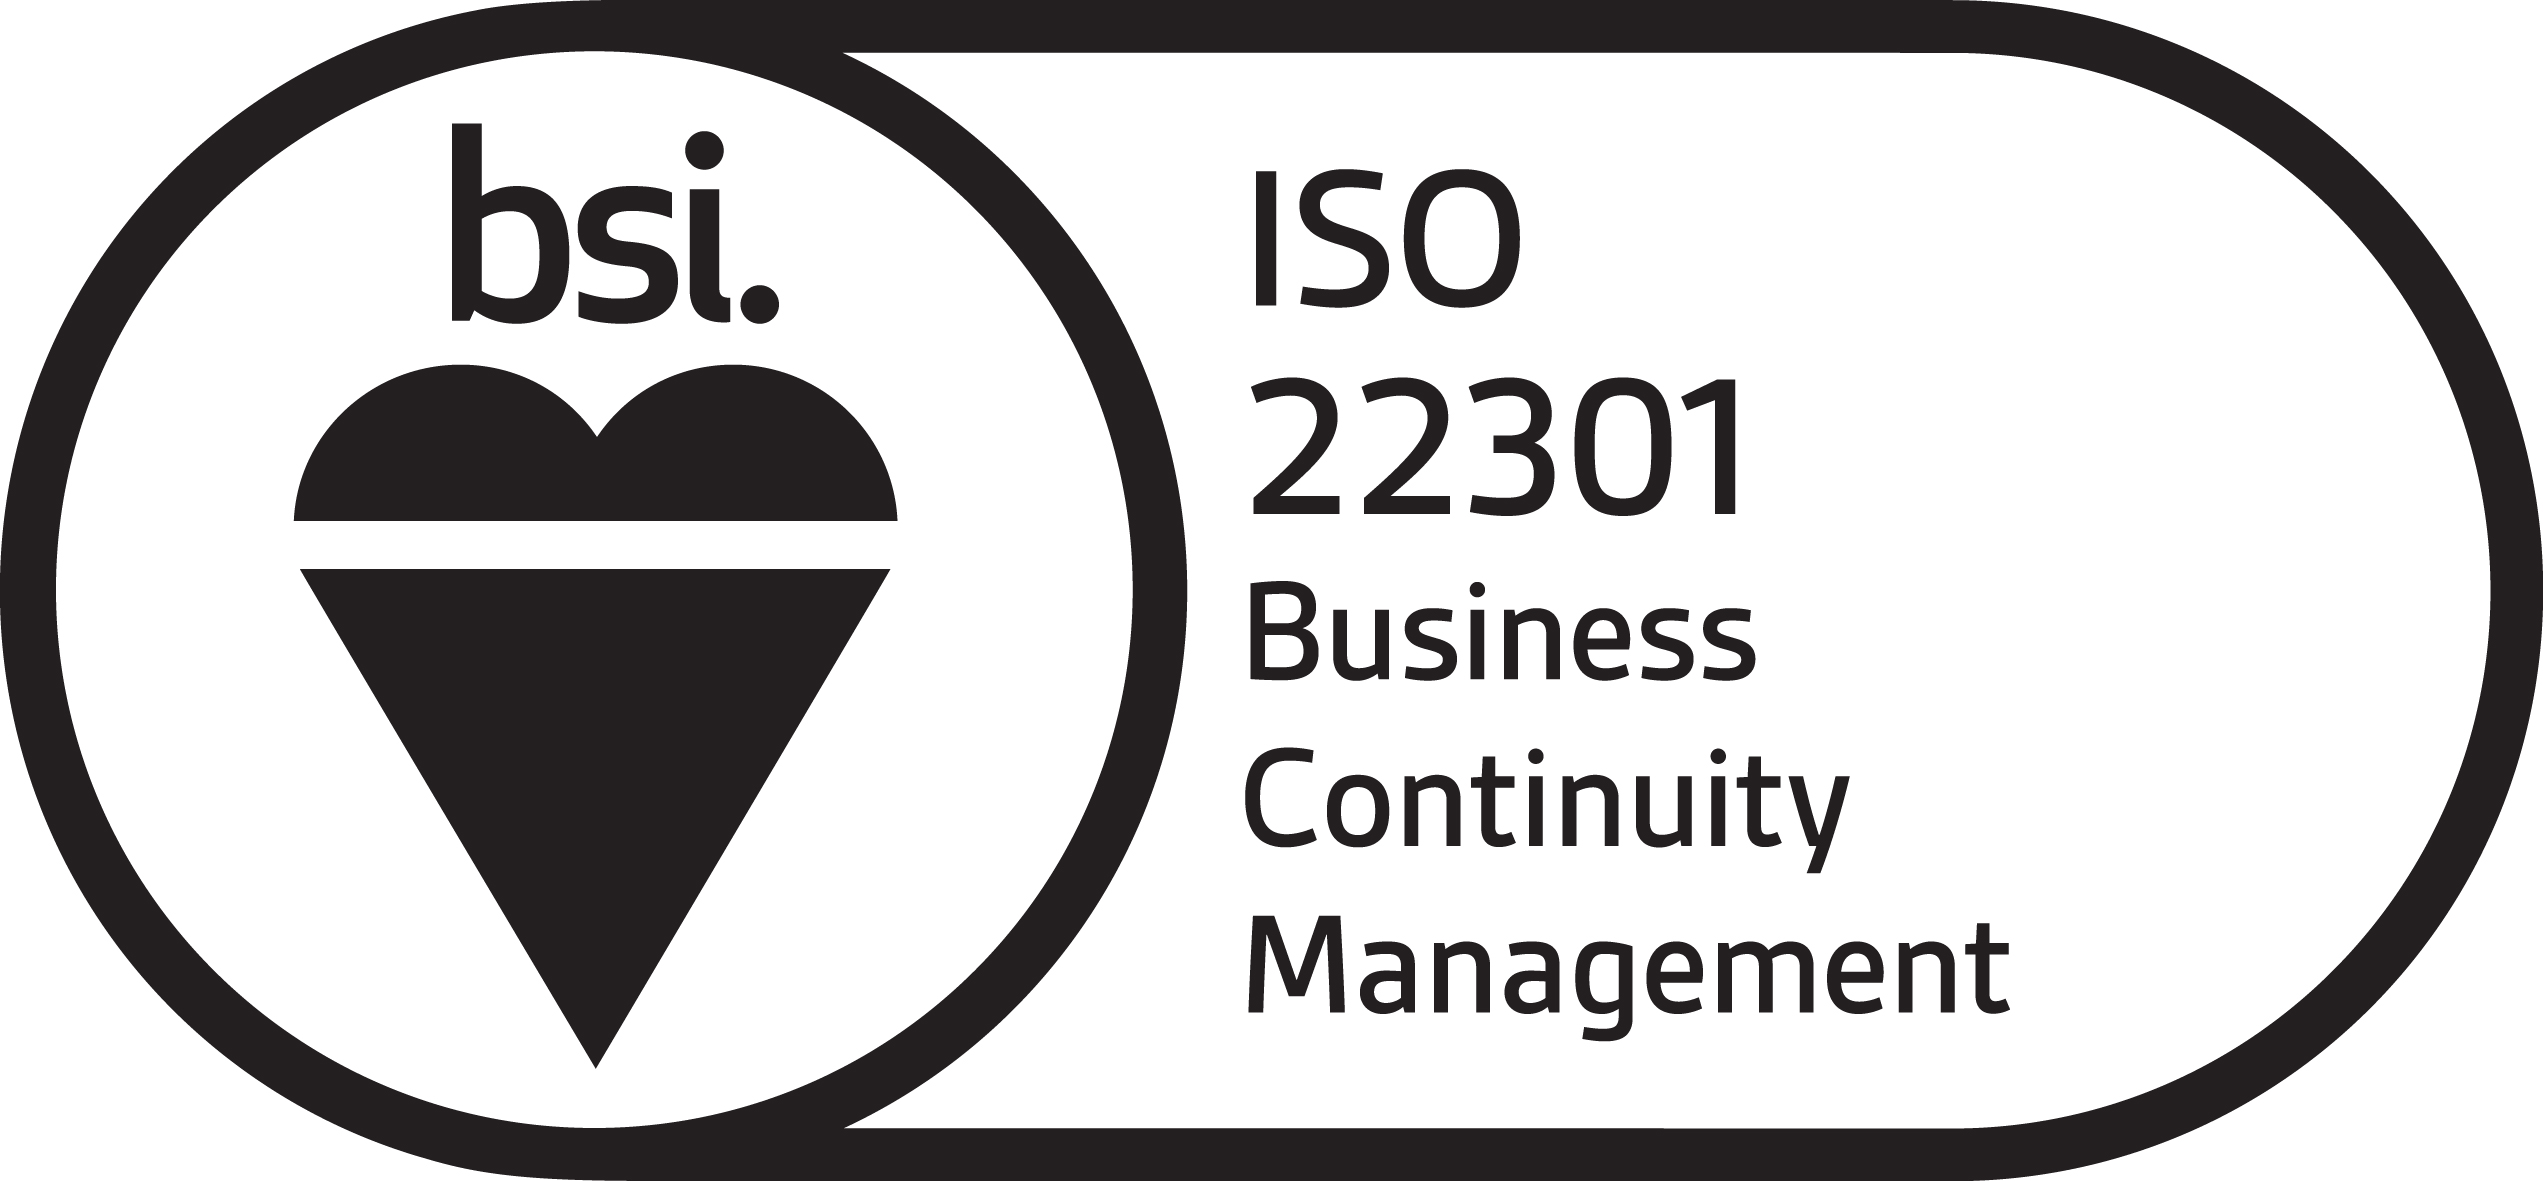 ISO 22301 Business Continuity Management